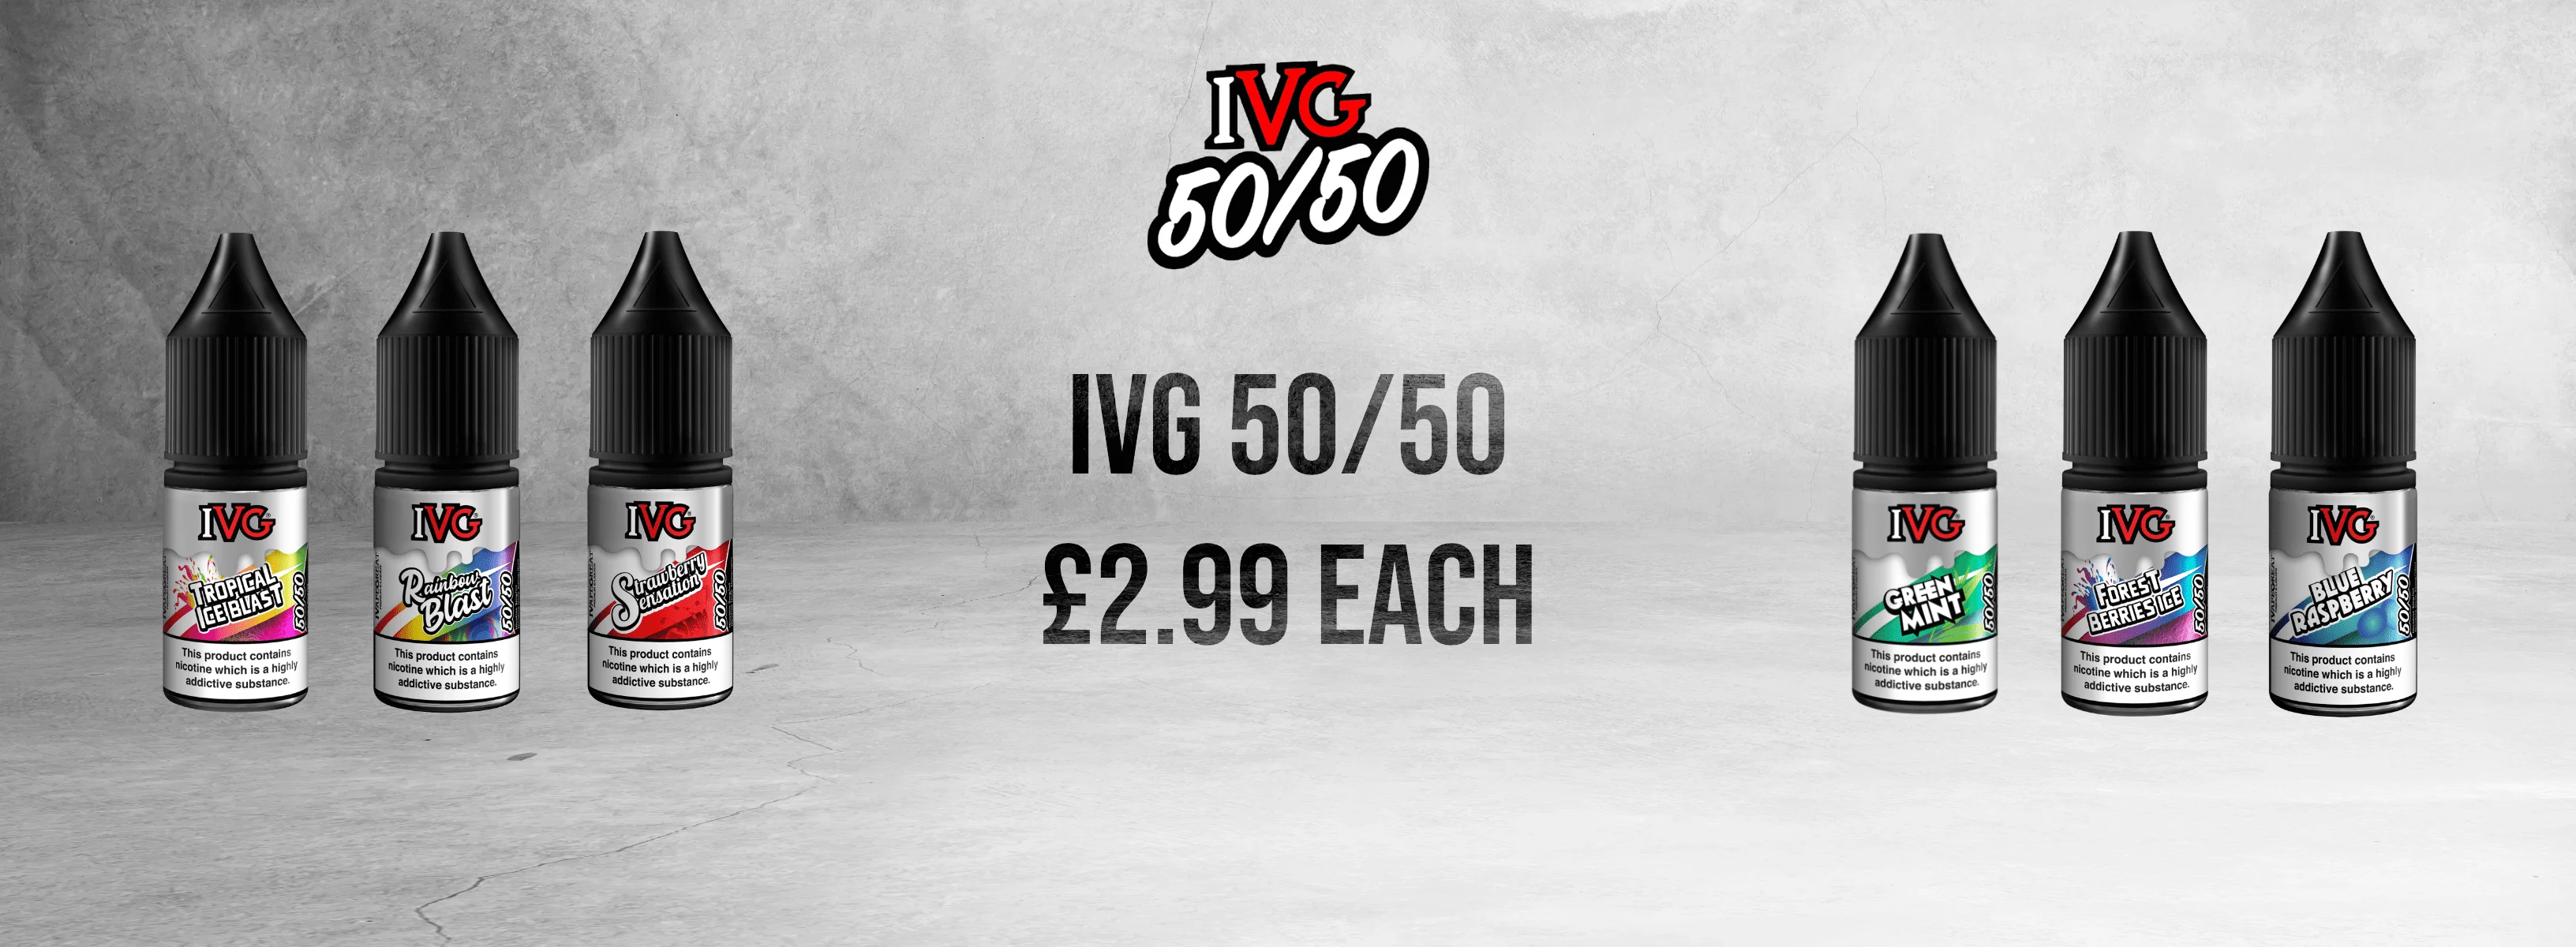 Advert for IVG 50/50